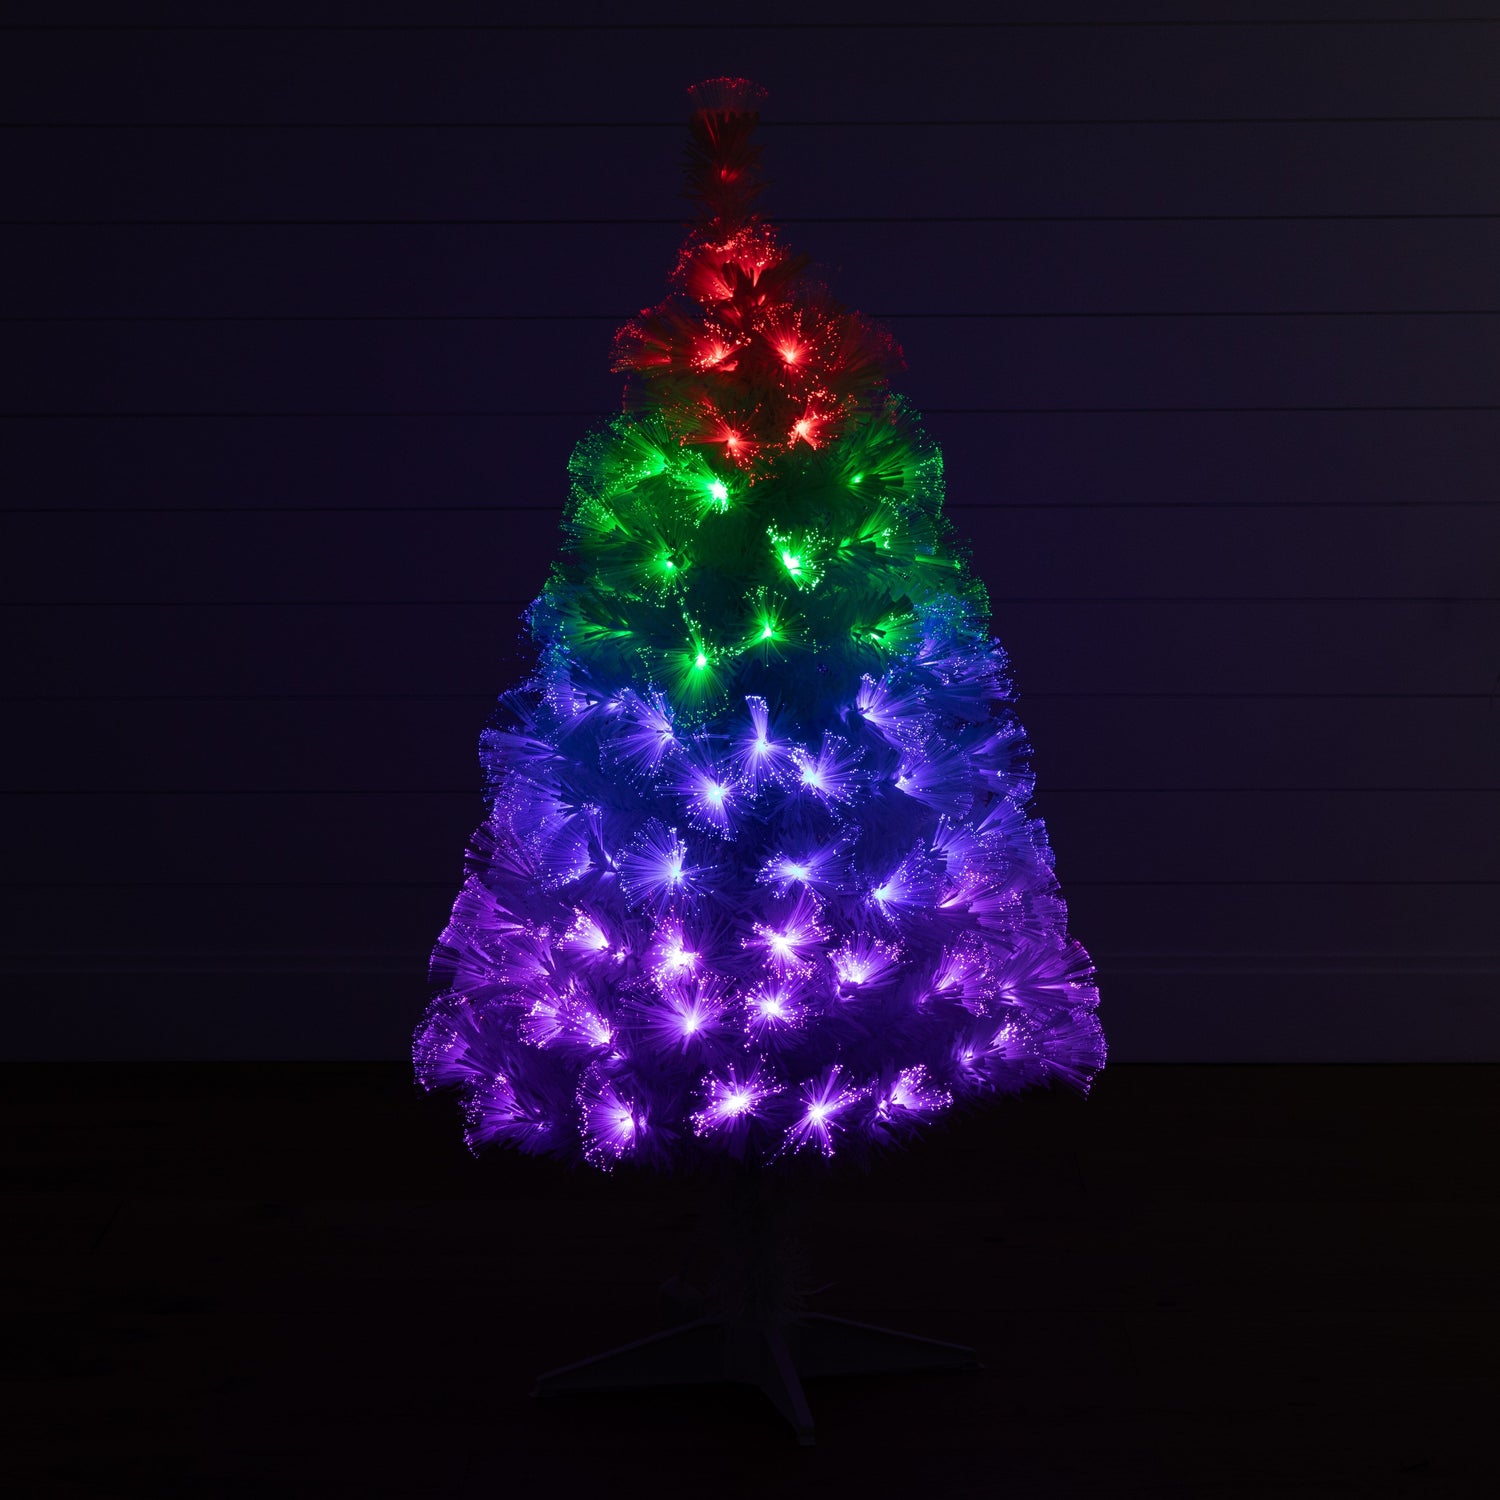 4' White Pre-Lit Fiber Optic Artificial Christmas Tree with 120 Colorful LED and Remote Control Show